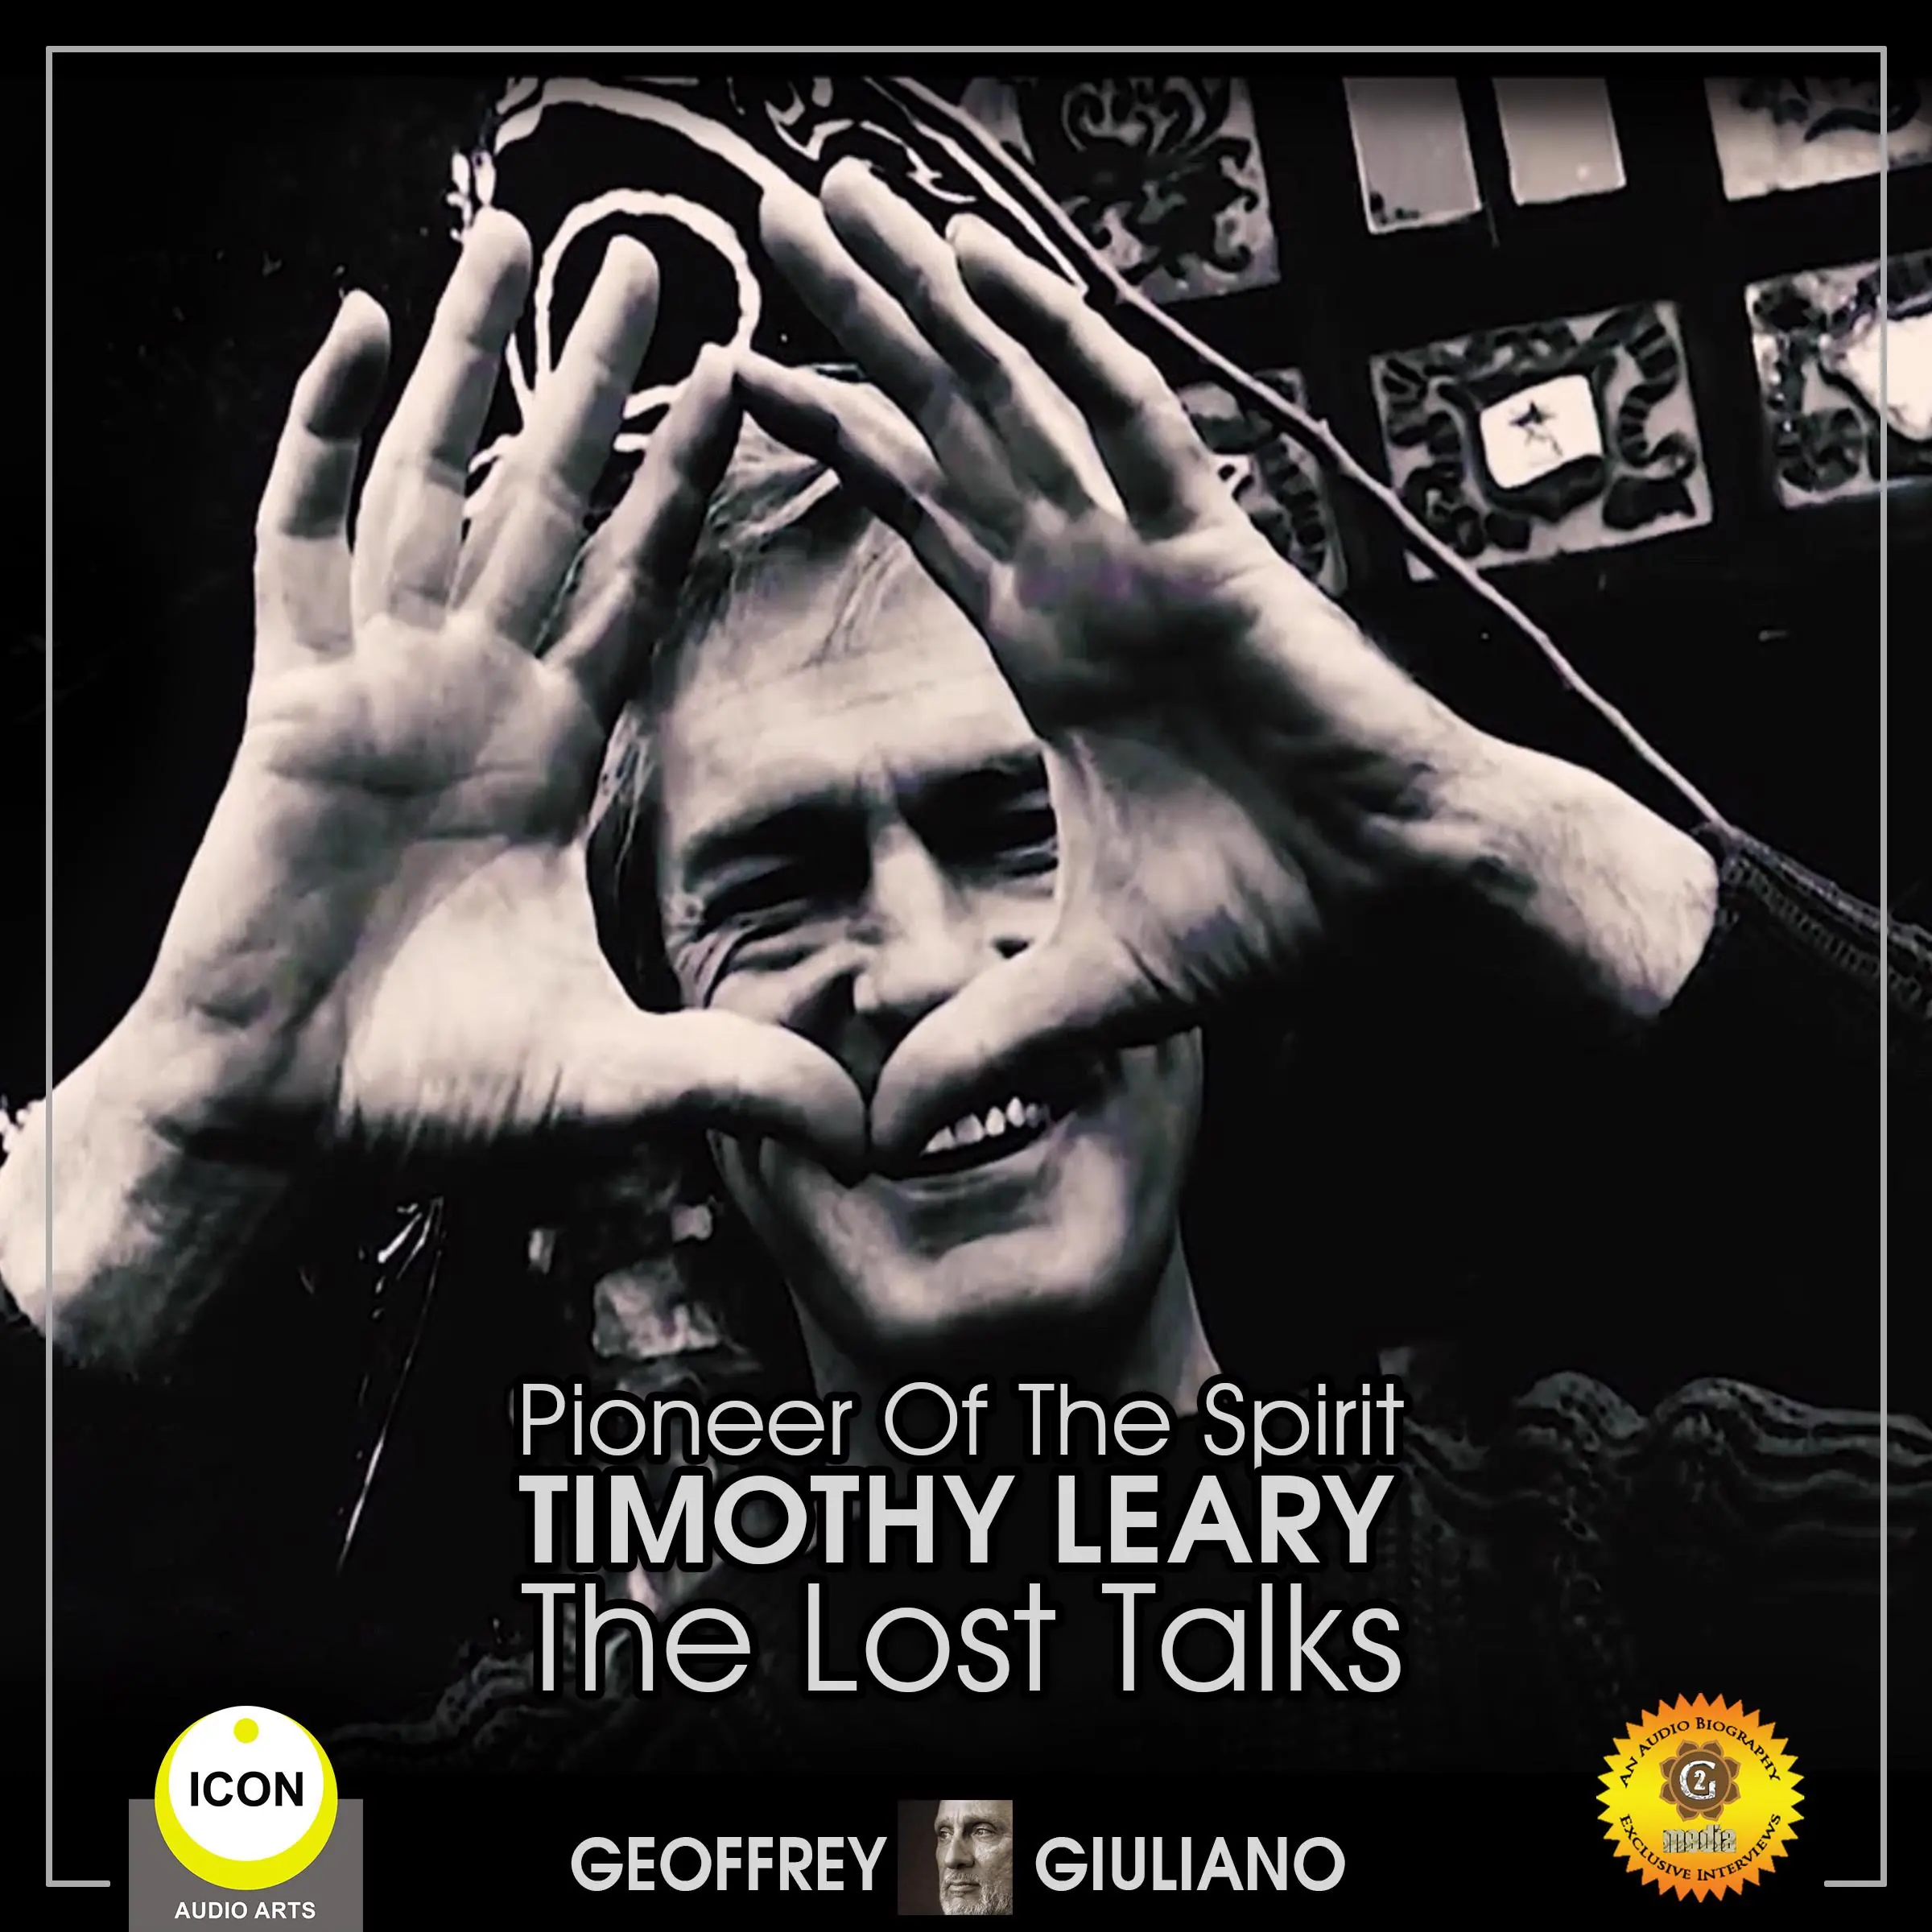 Pioneer Of The Spirit Timothy Leary - The Lost Talks by Geoffrey Giuliano Audiobook